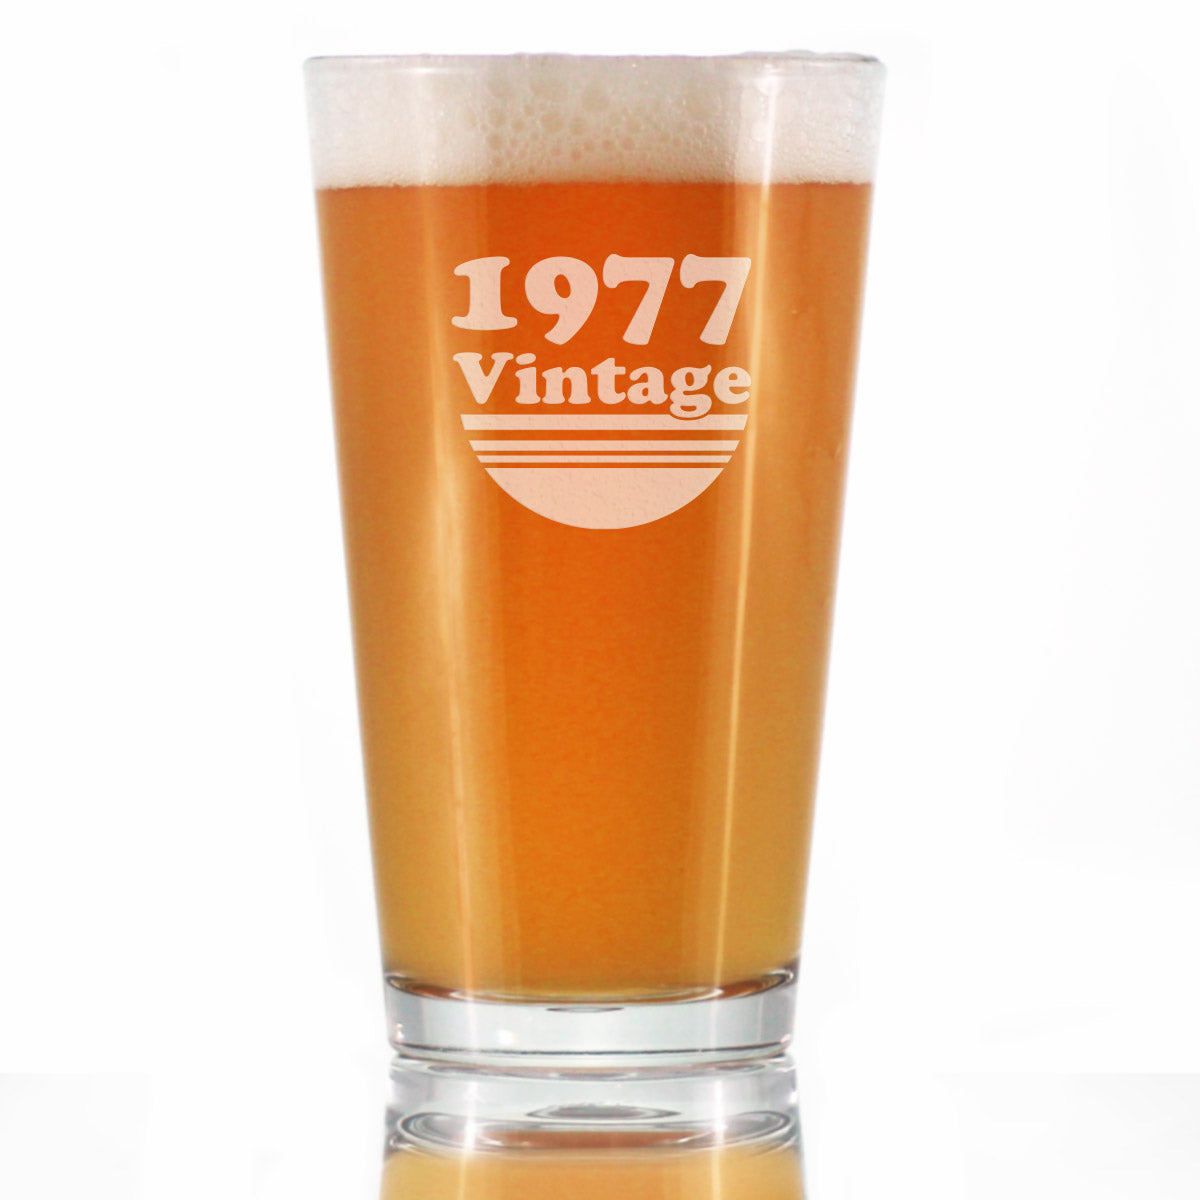 Vintage 1977 - Pint Glass for Beer - 46th Birthday Gifts for Men or Women Turning 46 - Fun Bday Party Decor - 16 oz